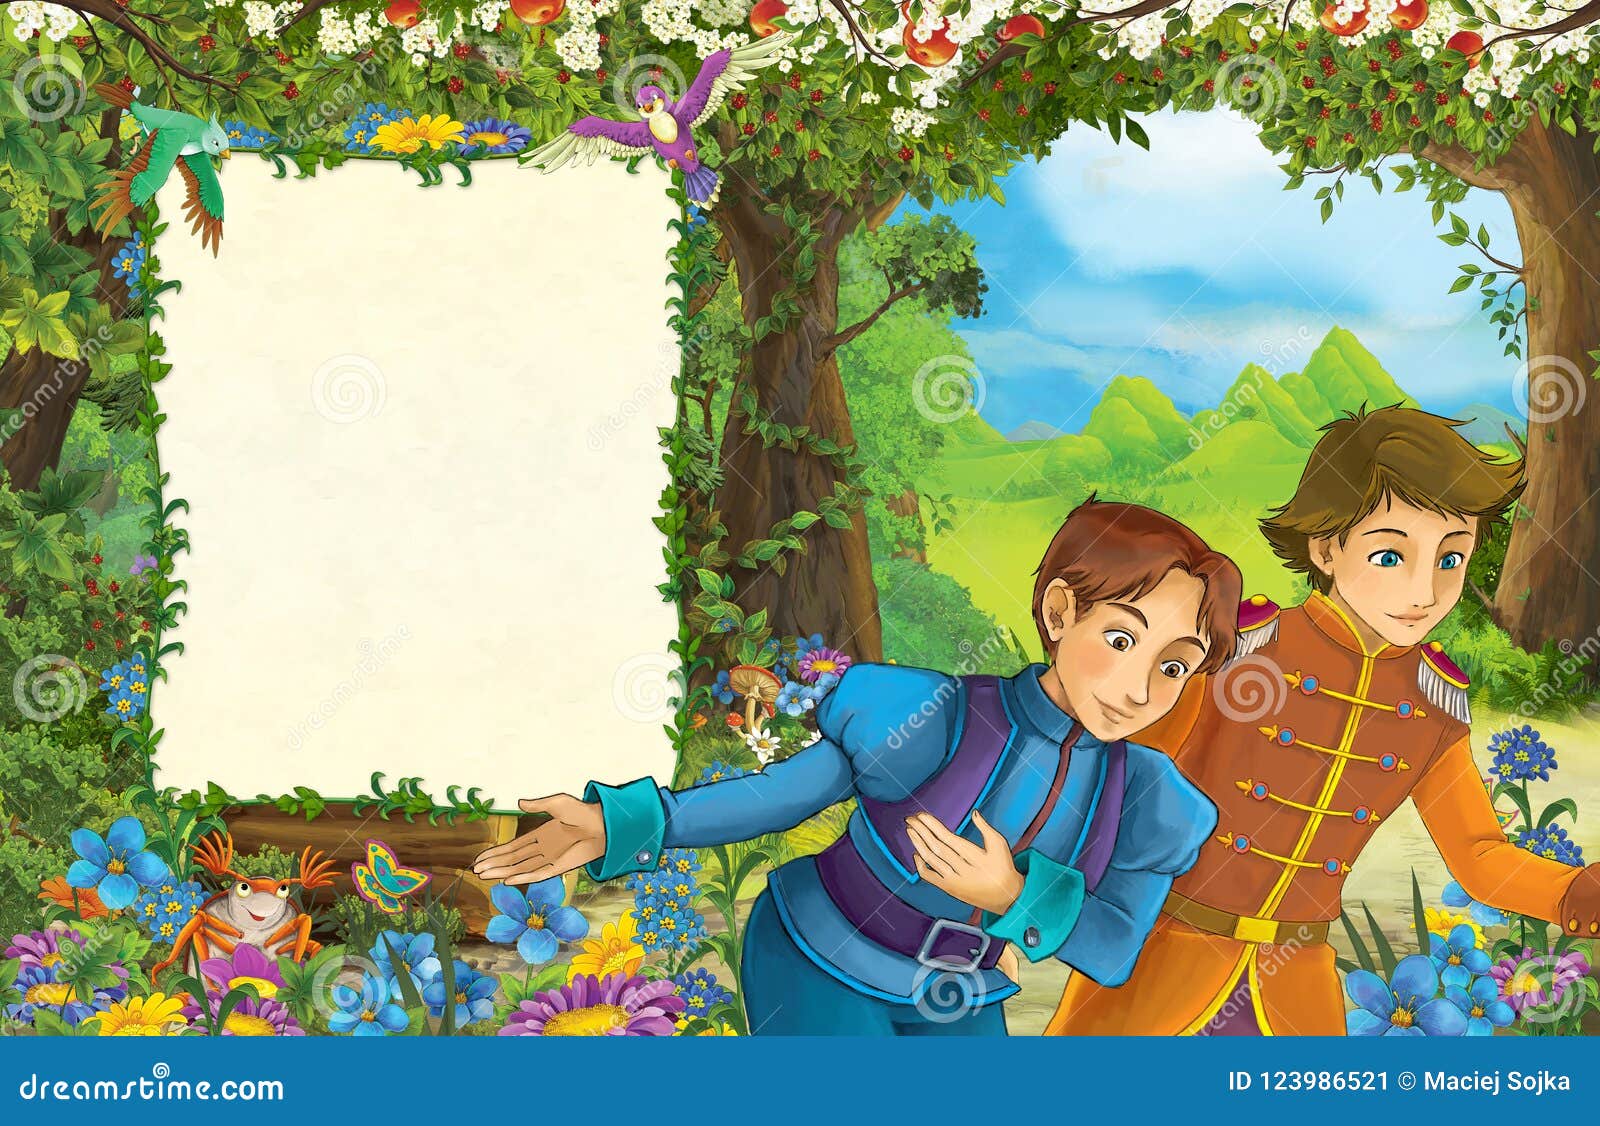 Cartoon Scene with Prince in the Forest - Title Page with Space for Text  Stock Illustration - Illustration of fable, colorful: 123986521